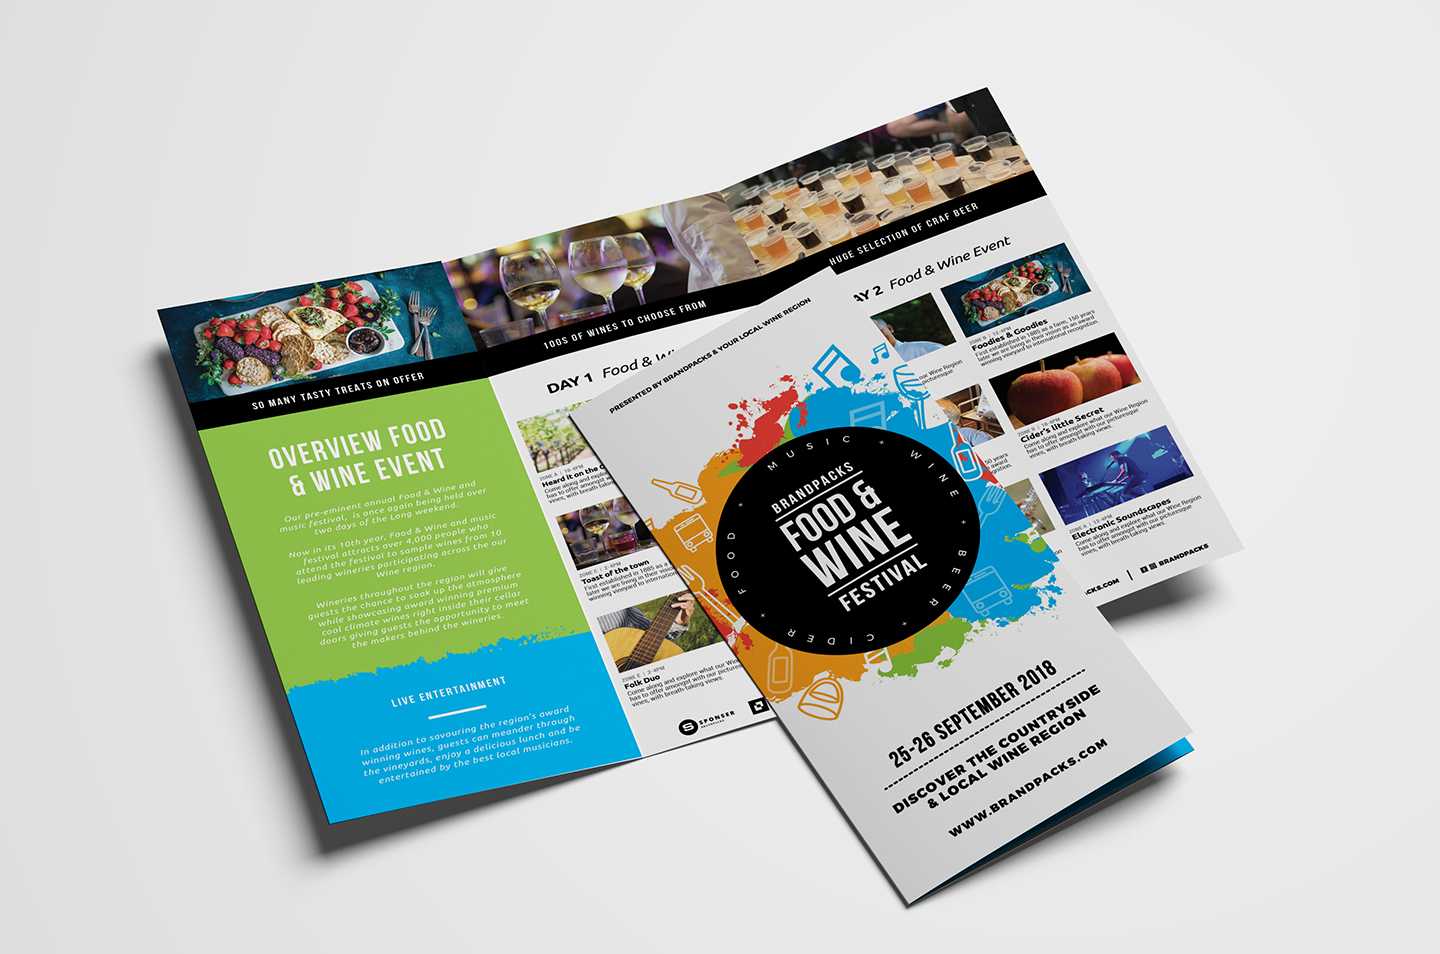 Free Tri Fold Brochure Template For Events & Festivals – Psd Throughout Tri Fold Brochure Template Illustrator Free